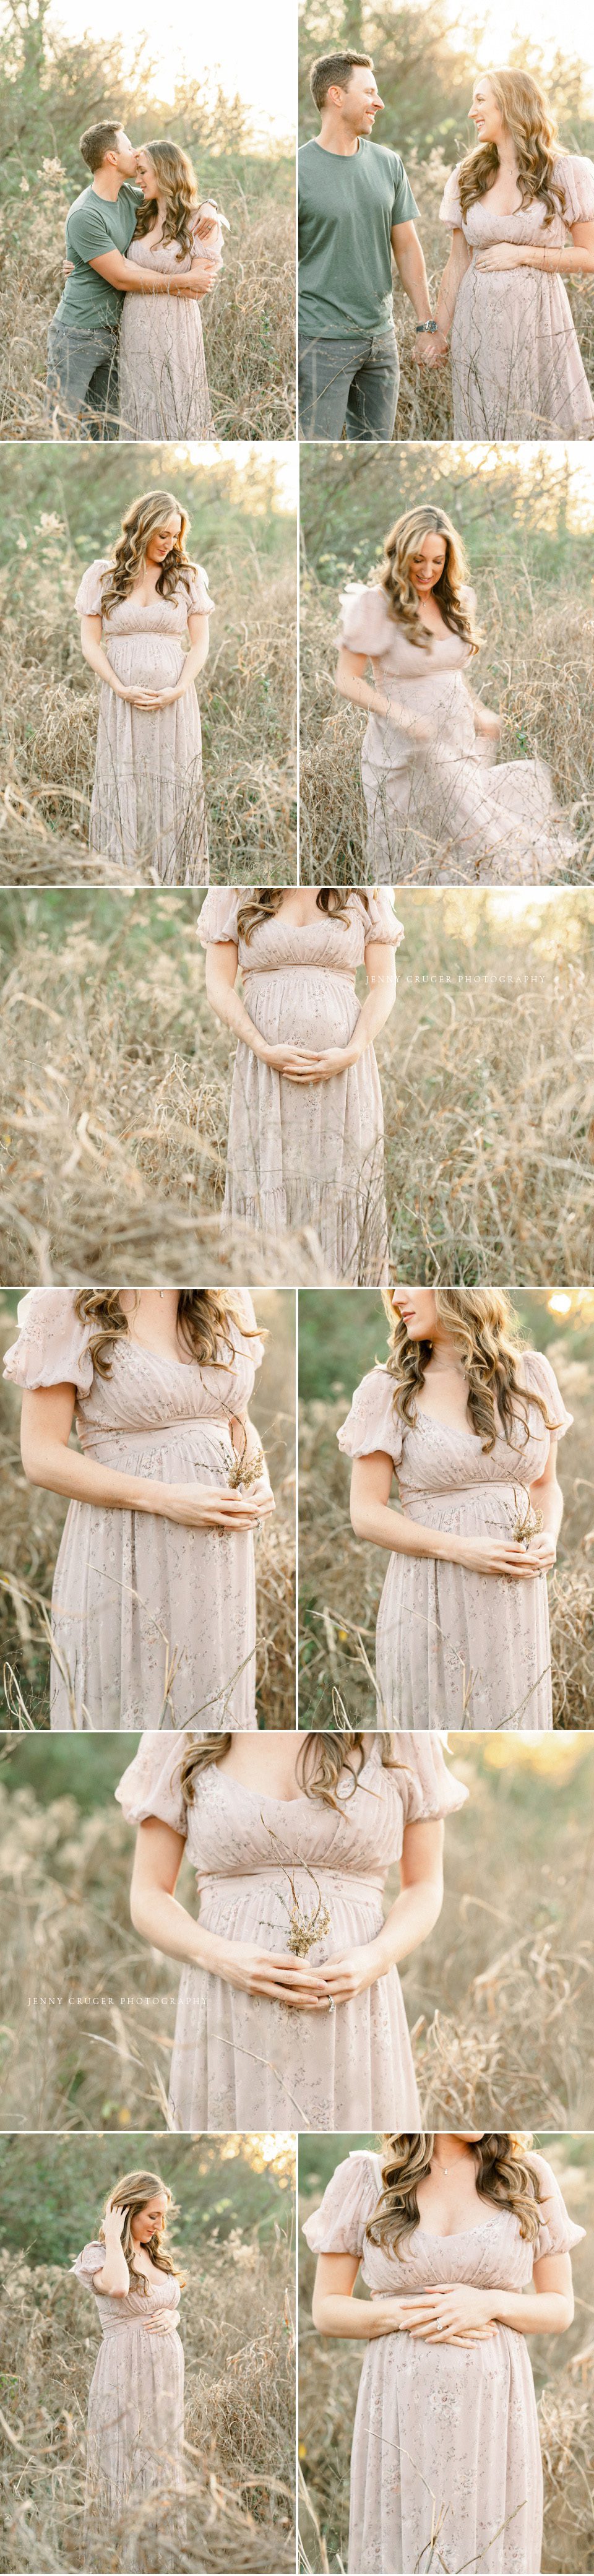 maternity session in the winter outside in a field